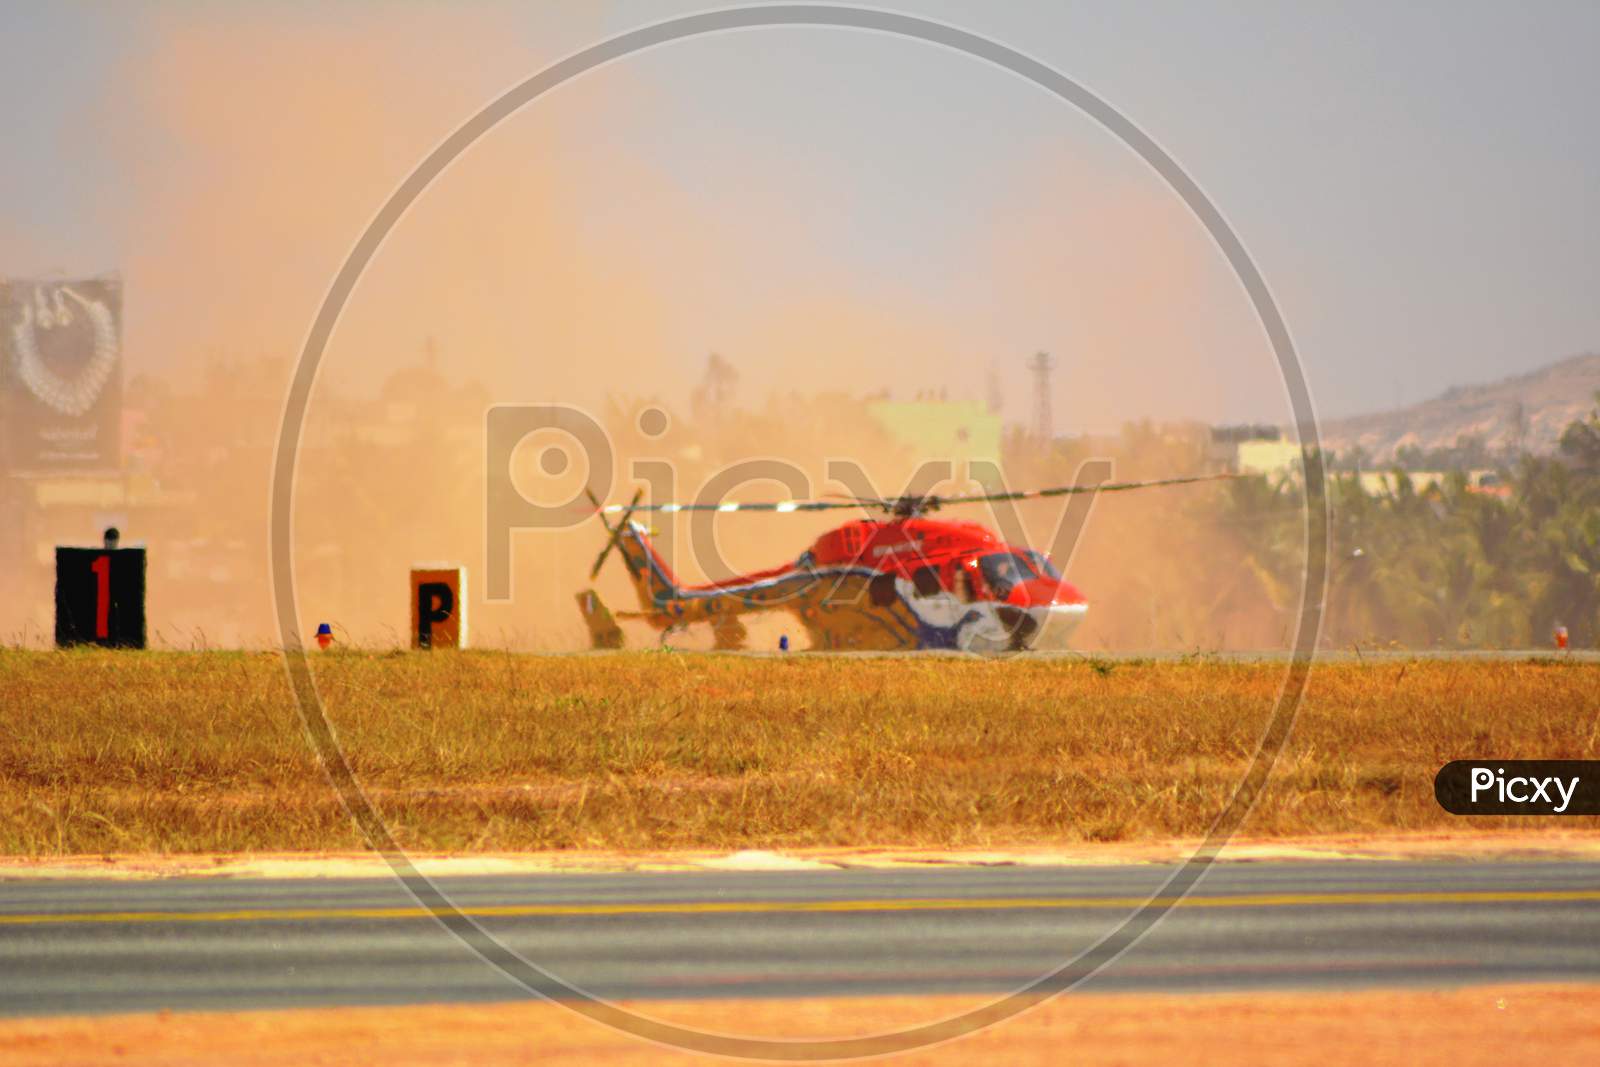 Sarang, the helicopter air display team of the Indian Air Force